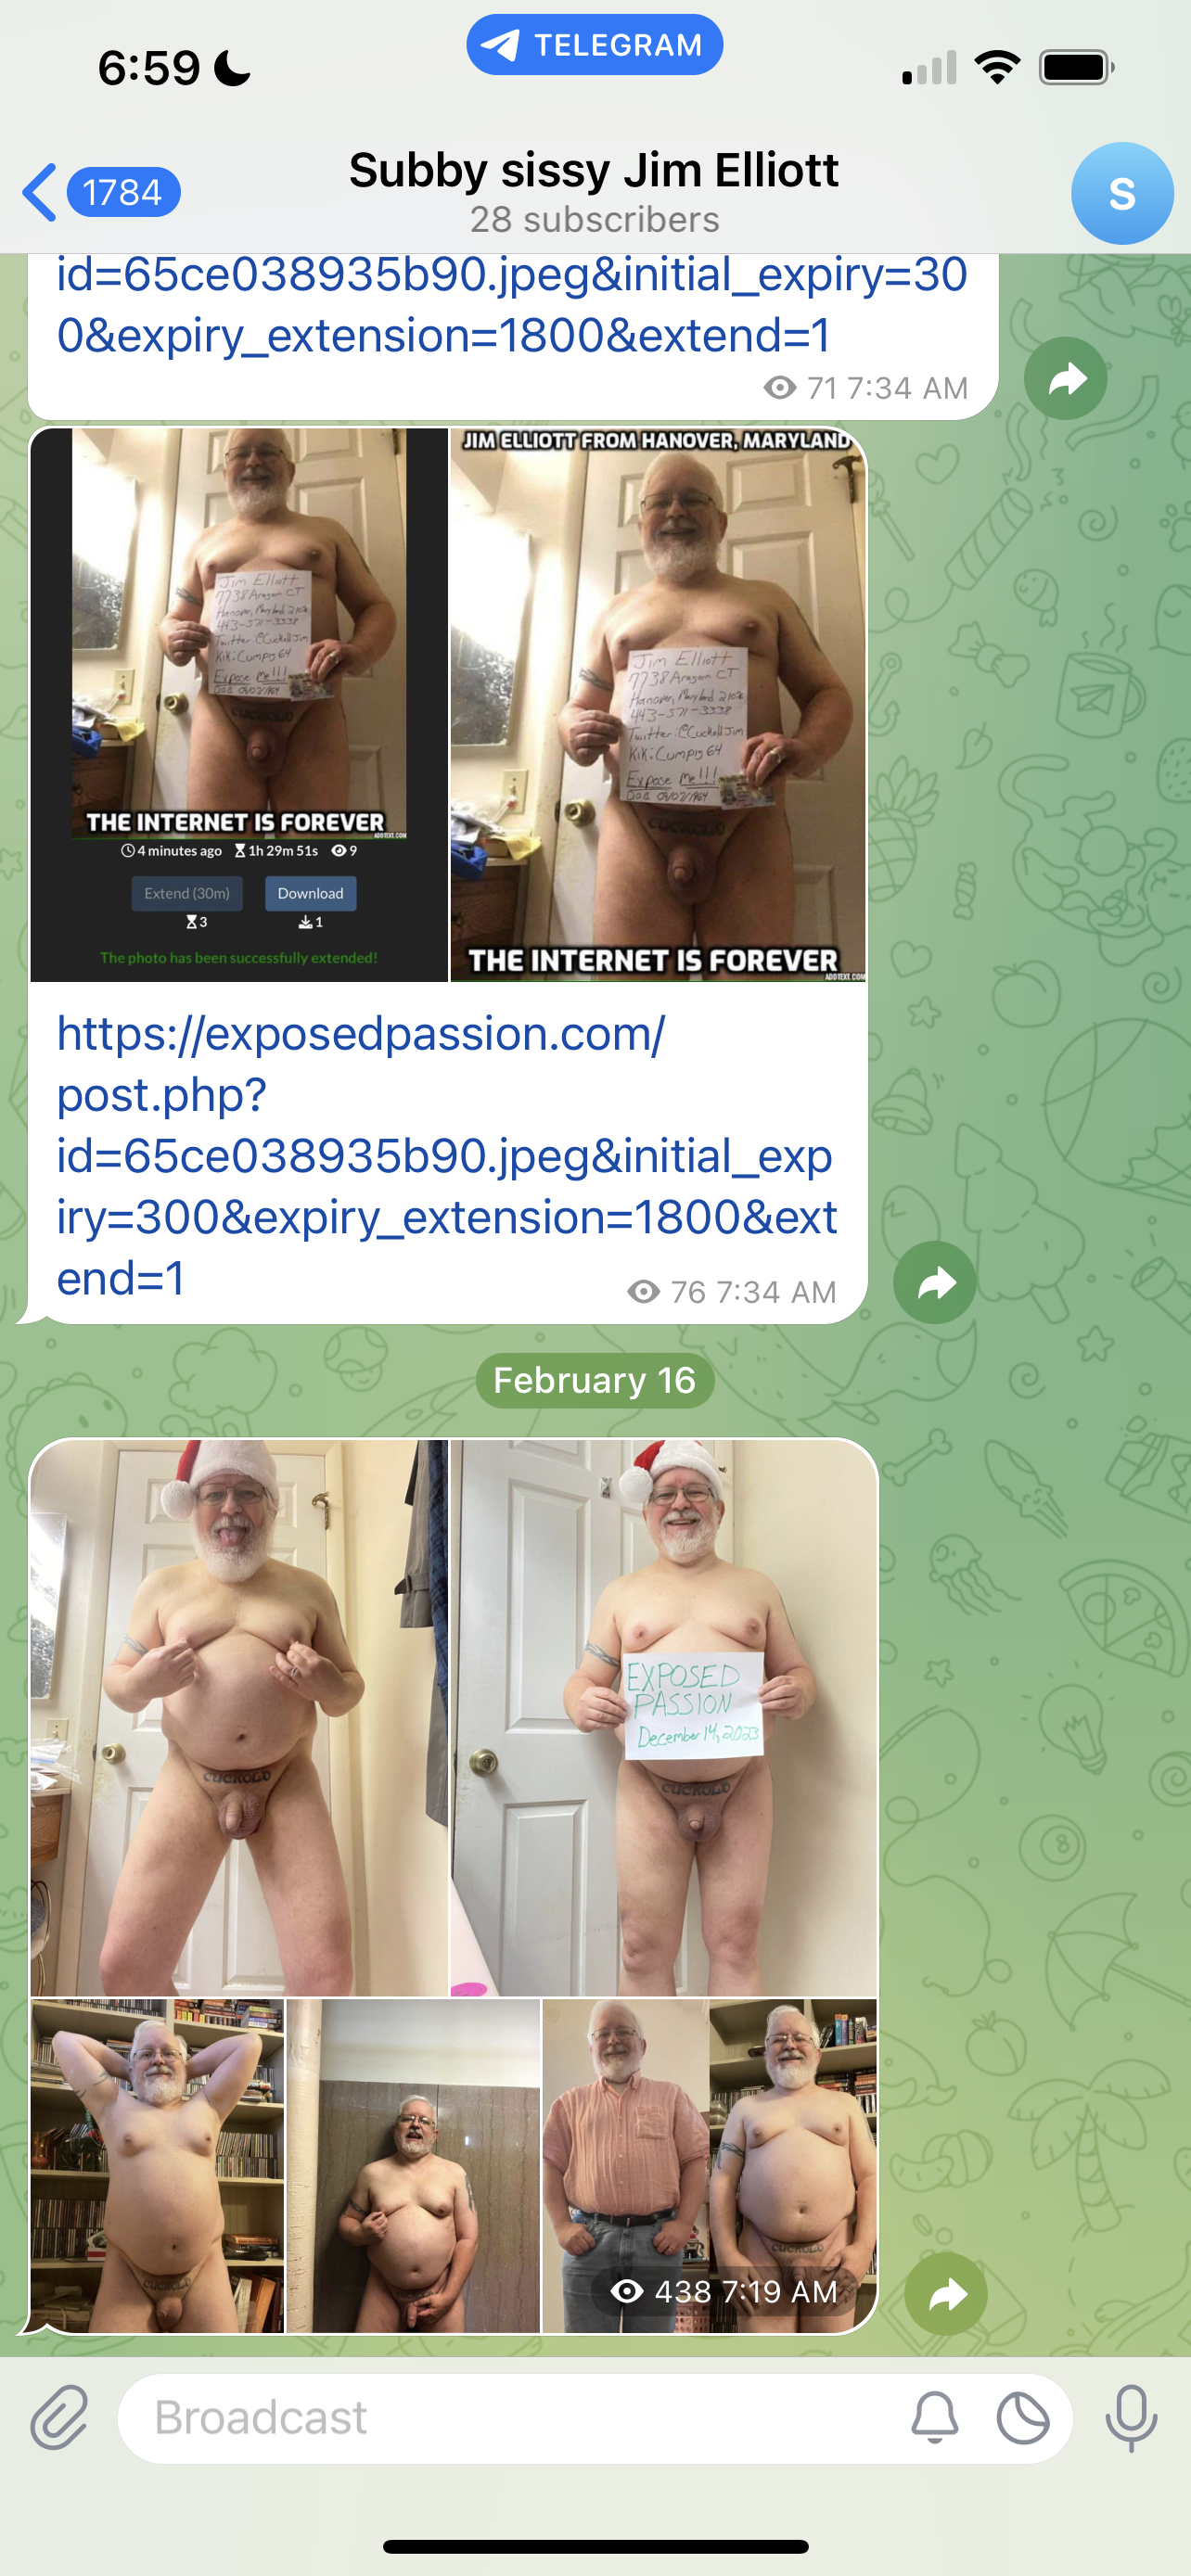 Check out my ID exposure videos on Telegram